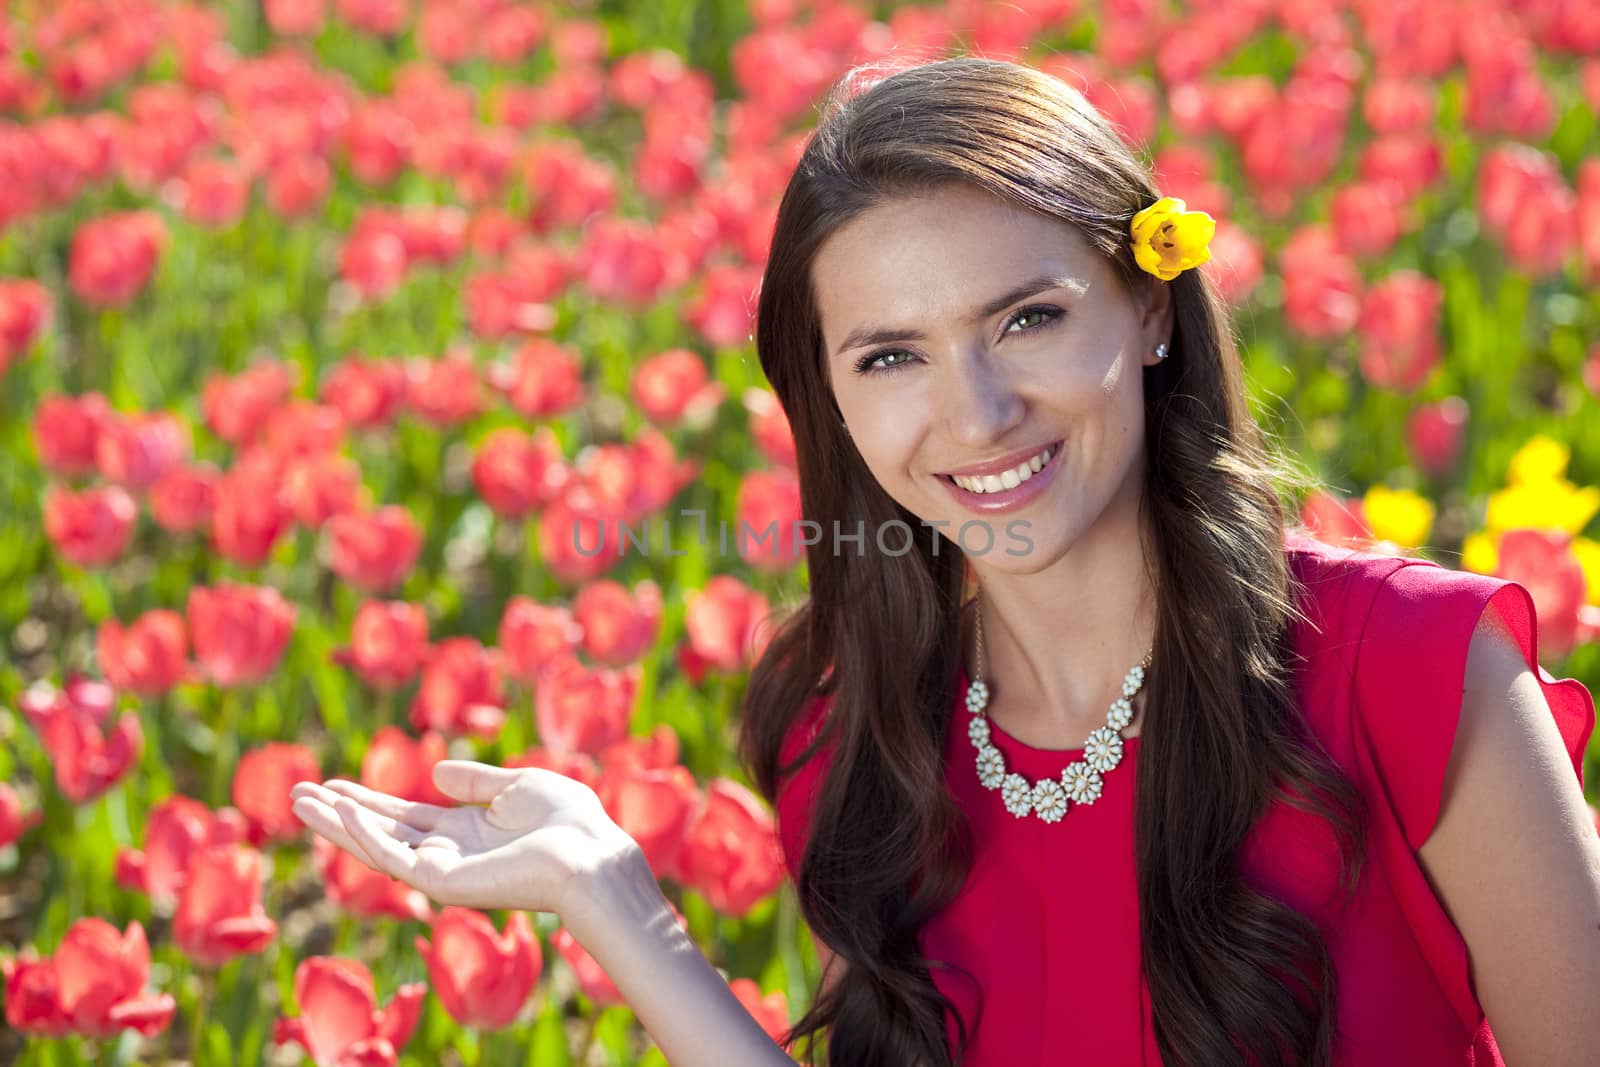 Beautiful young woman with tulips